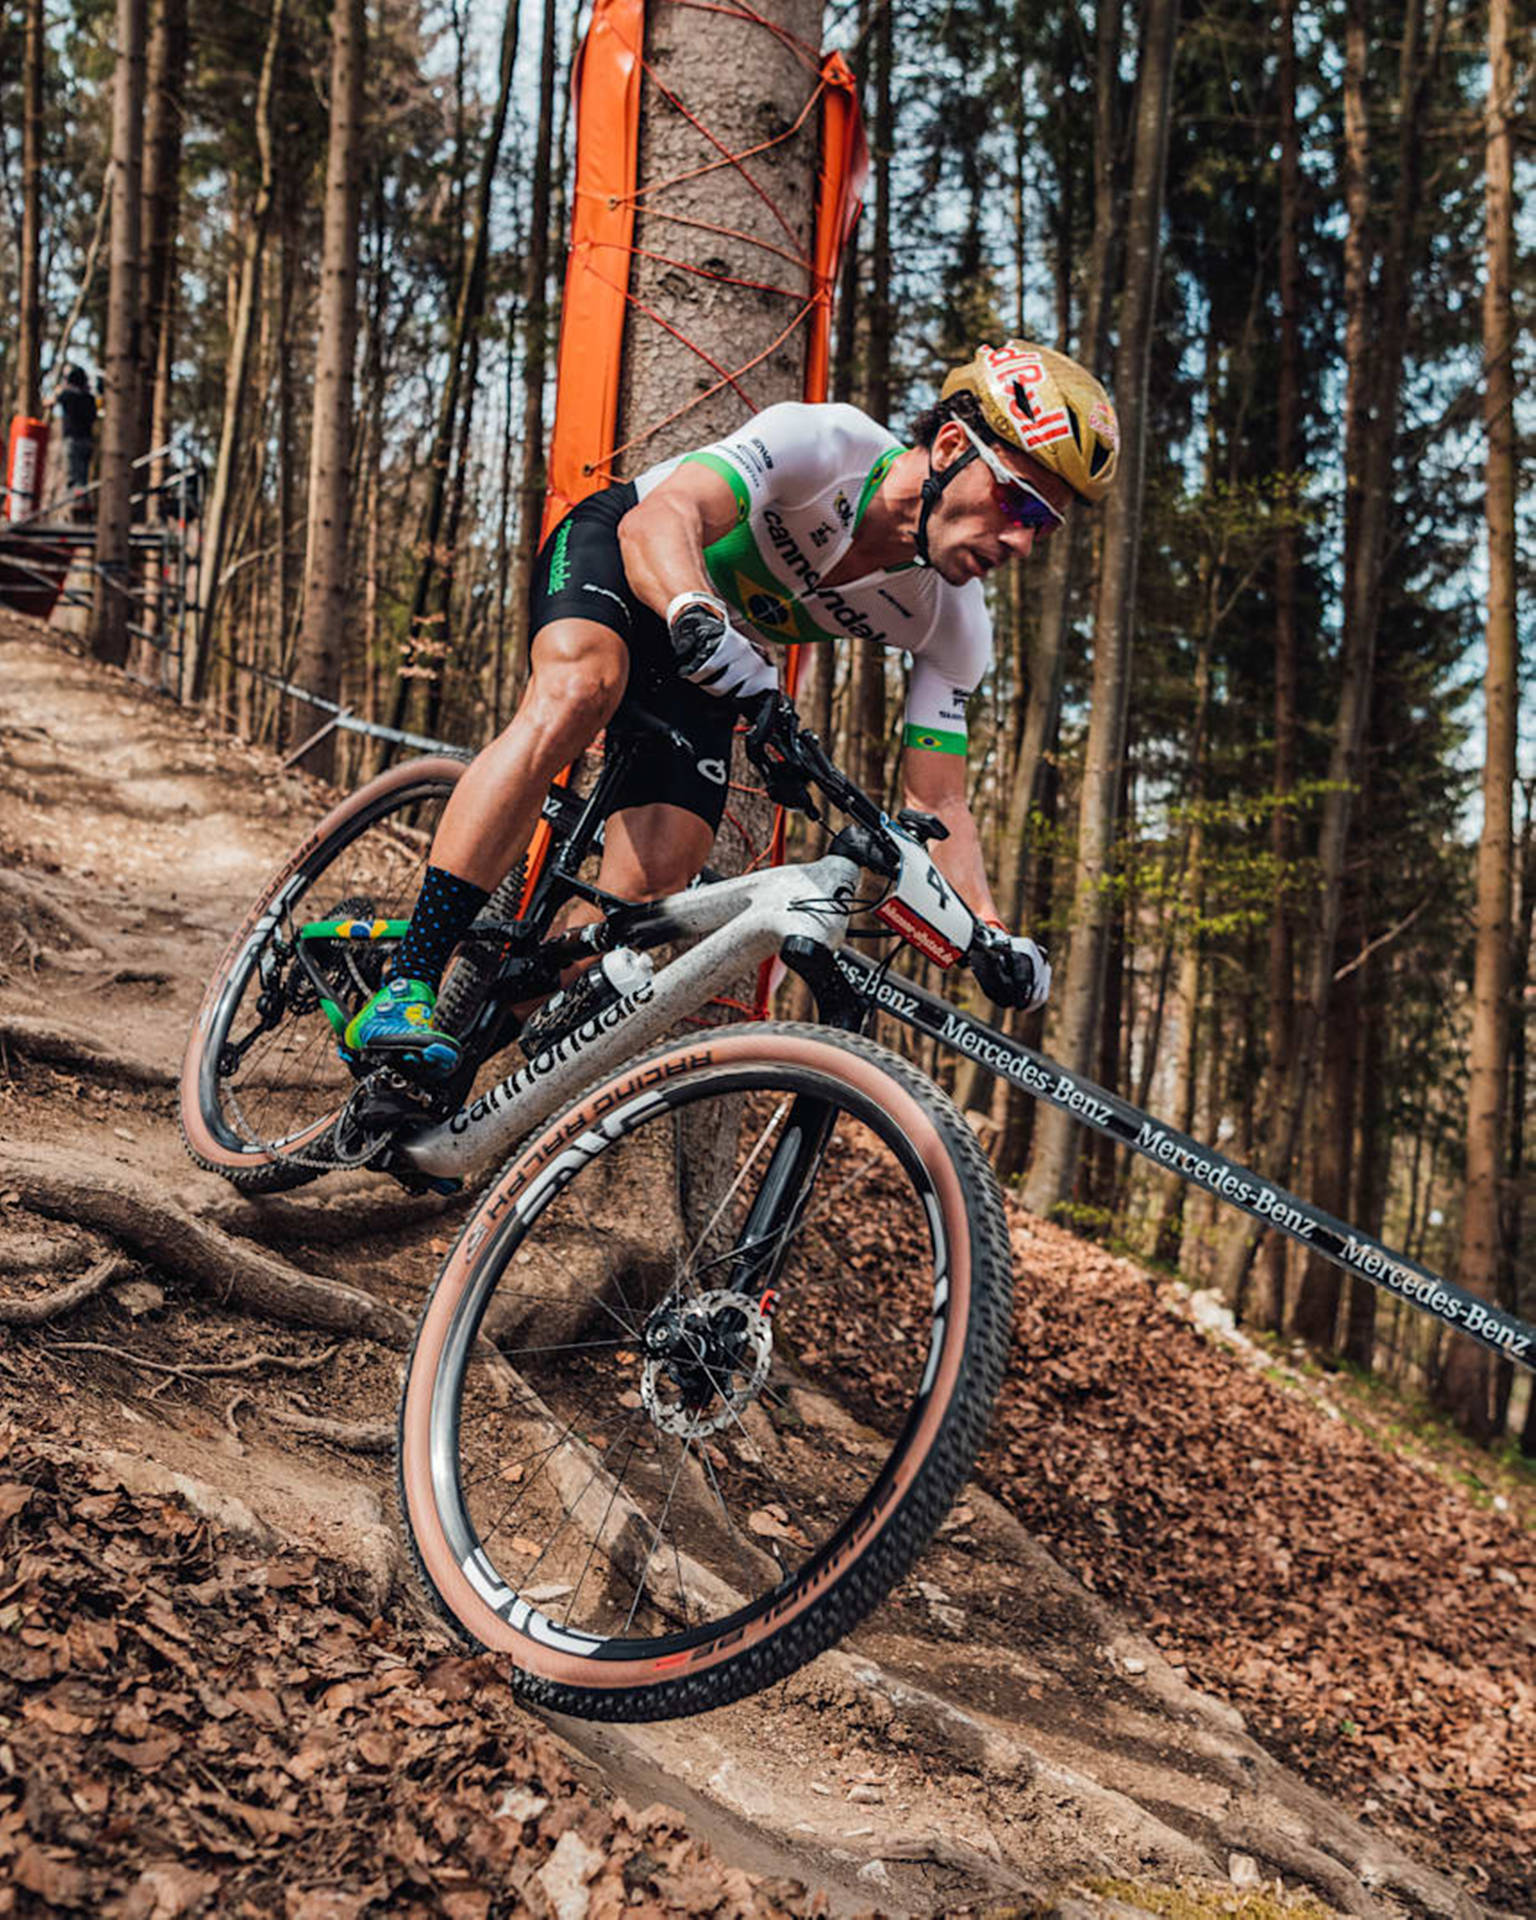 Caption: Thrilling Steep Ride With Cannondale 4k Mountain Bike Background